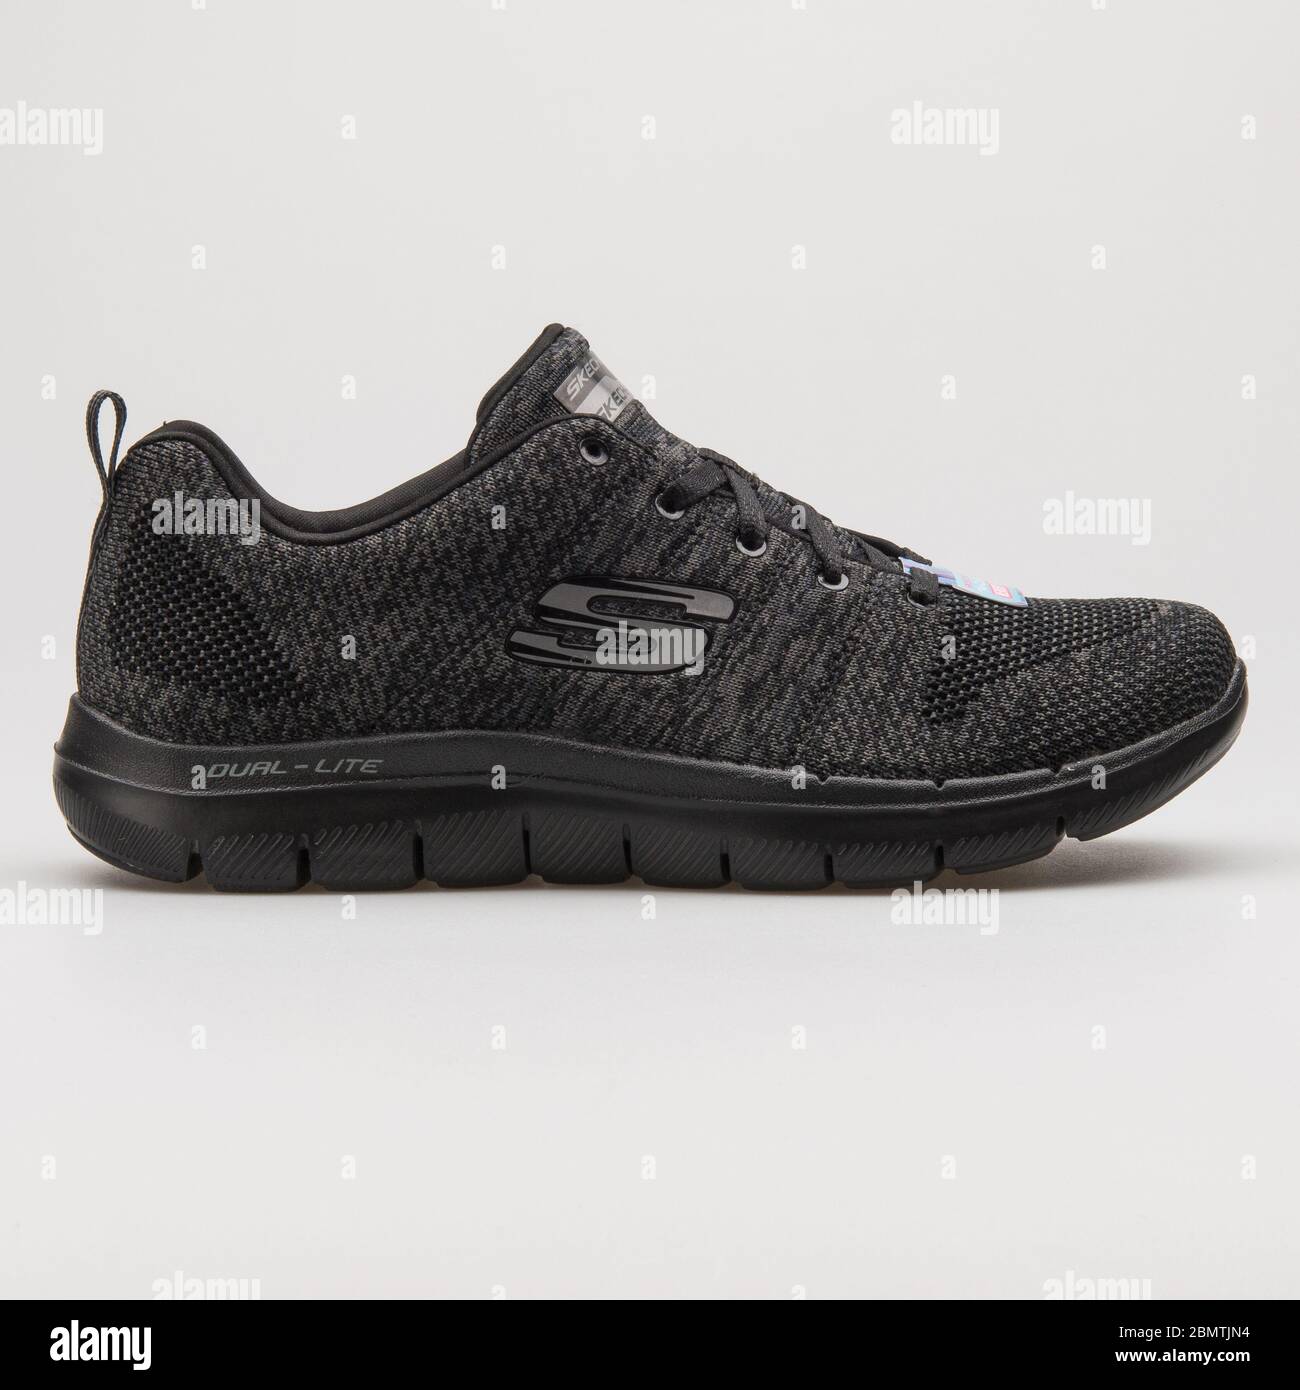 VIENNA, AUSTRIA - FEBRUARY 14, 2018: Skechers Flex Appeal 2.0 High Energy  black and grey sneaker on white background Stock Photo - Alamy